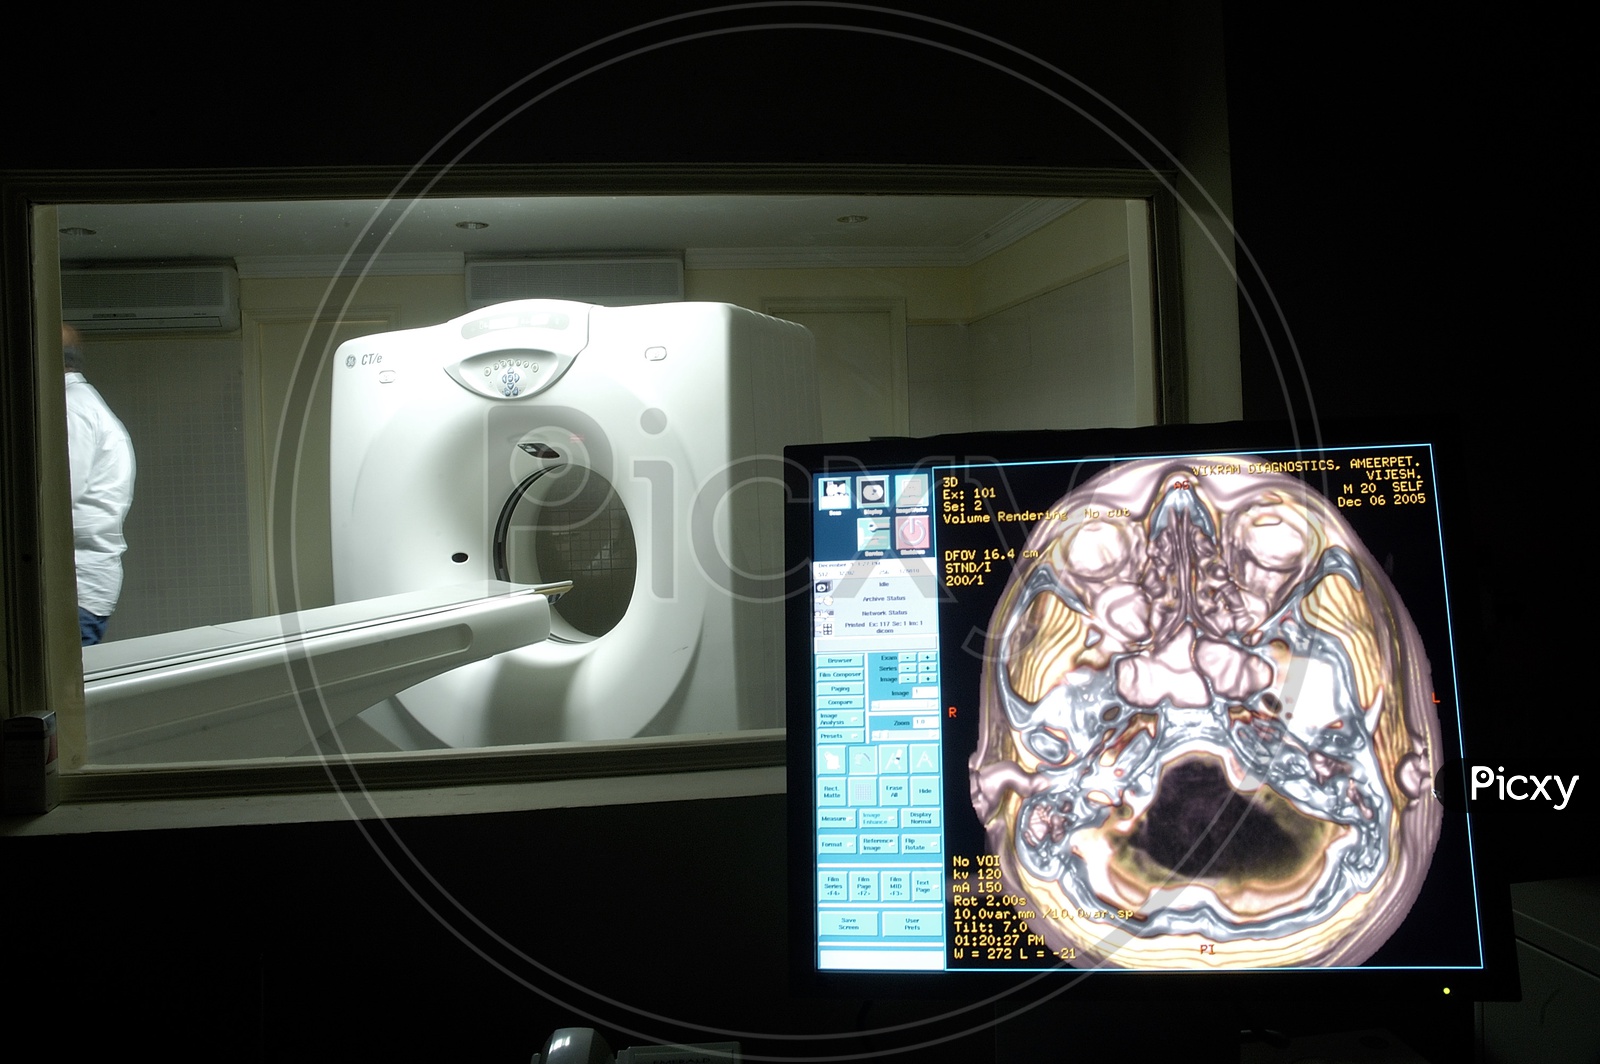 Photograph of CT Scan Machine with Monitor in foreground in a Hospital